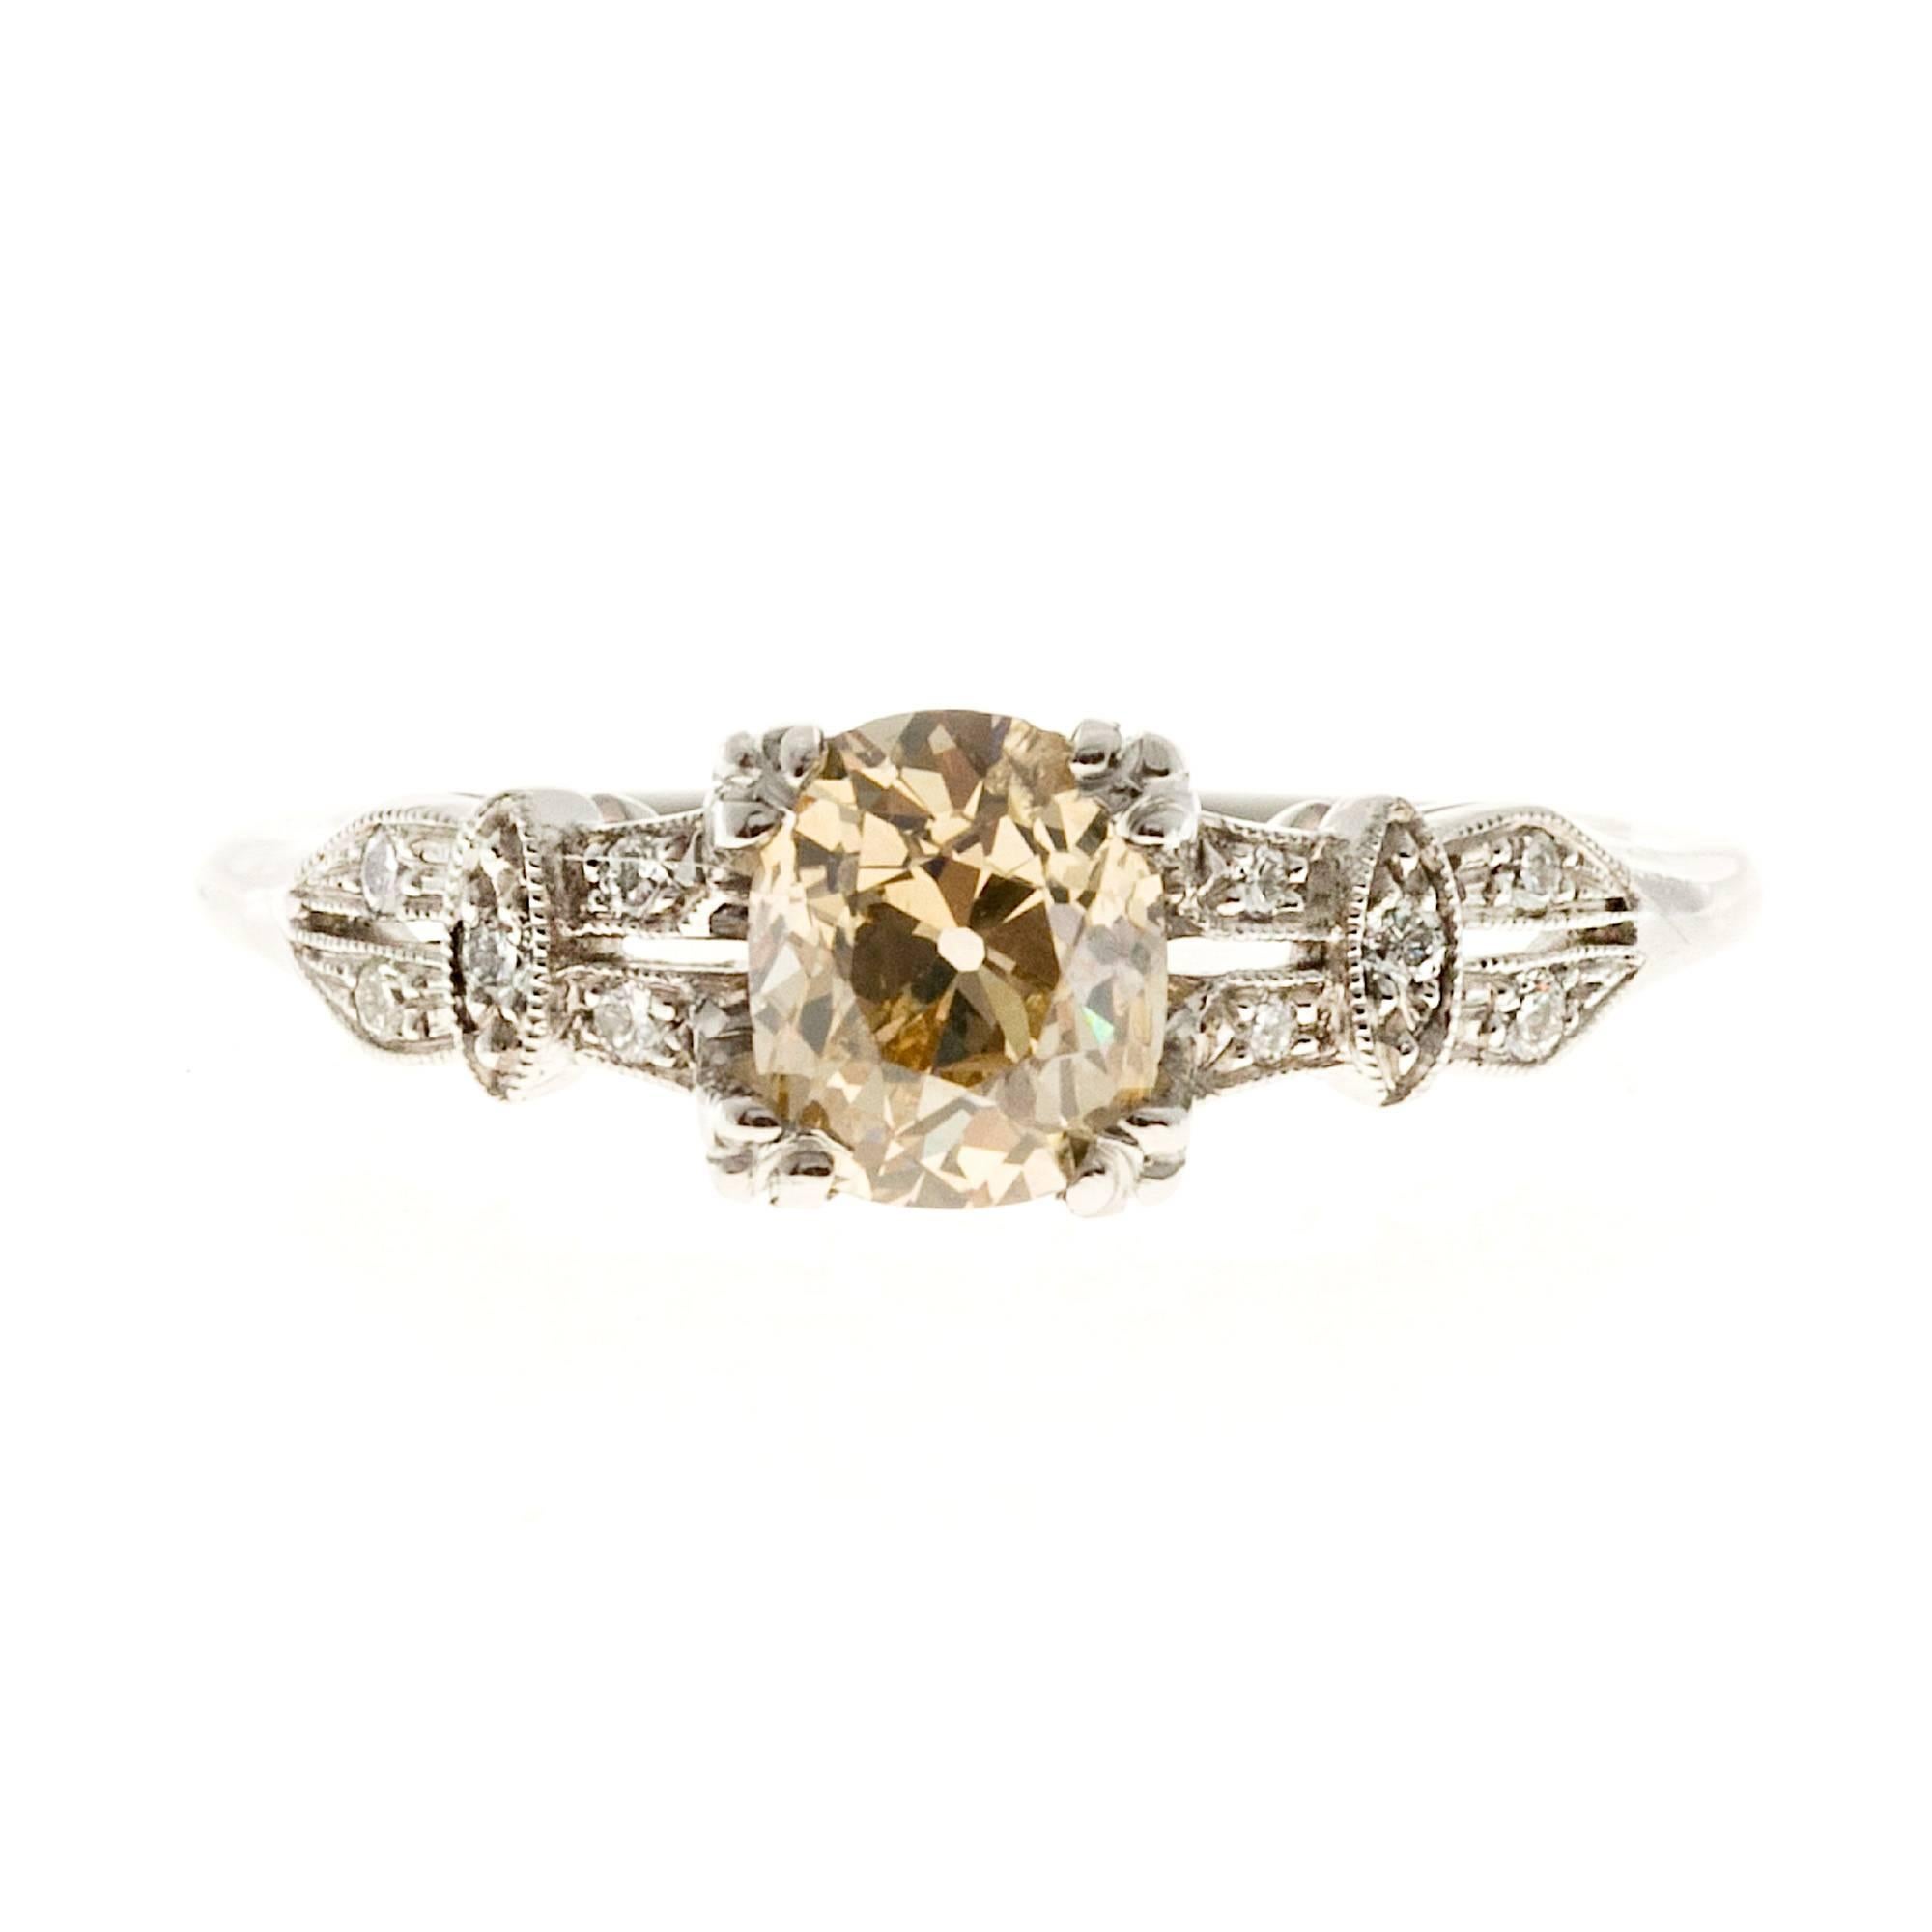 Natural GIA certified fancy light yellow brown cushion cut diamond with accent diamonds on shank. Set in an antique ring from the Peter Suchy Workshop PSD.

1 cushion diamond, approx. total weight .85cts, SI2, fancy light yellow brown, GIA